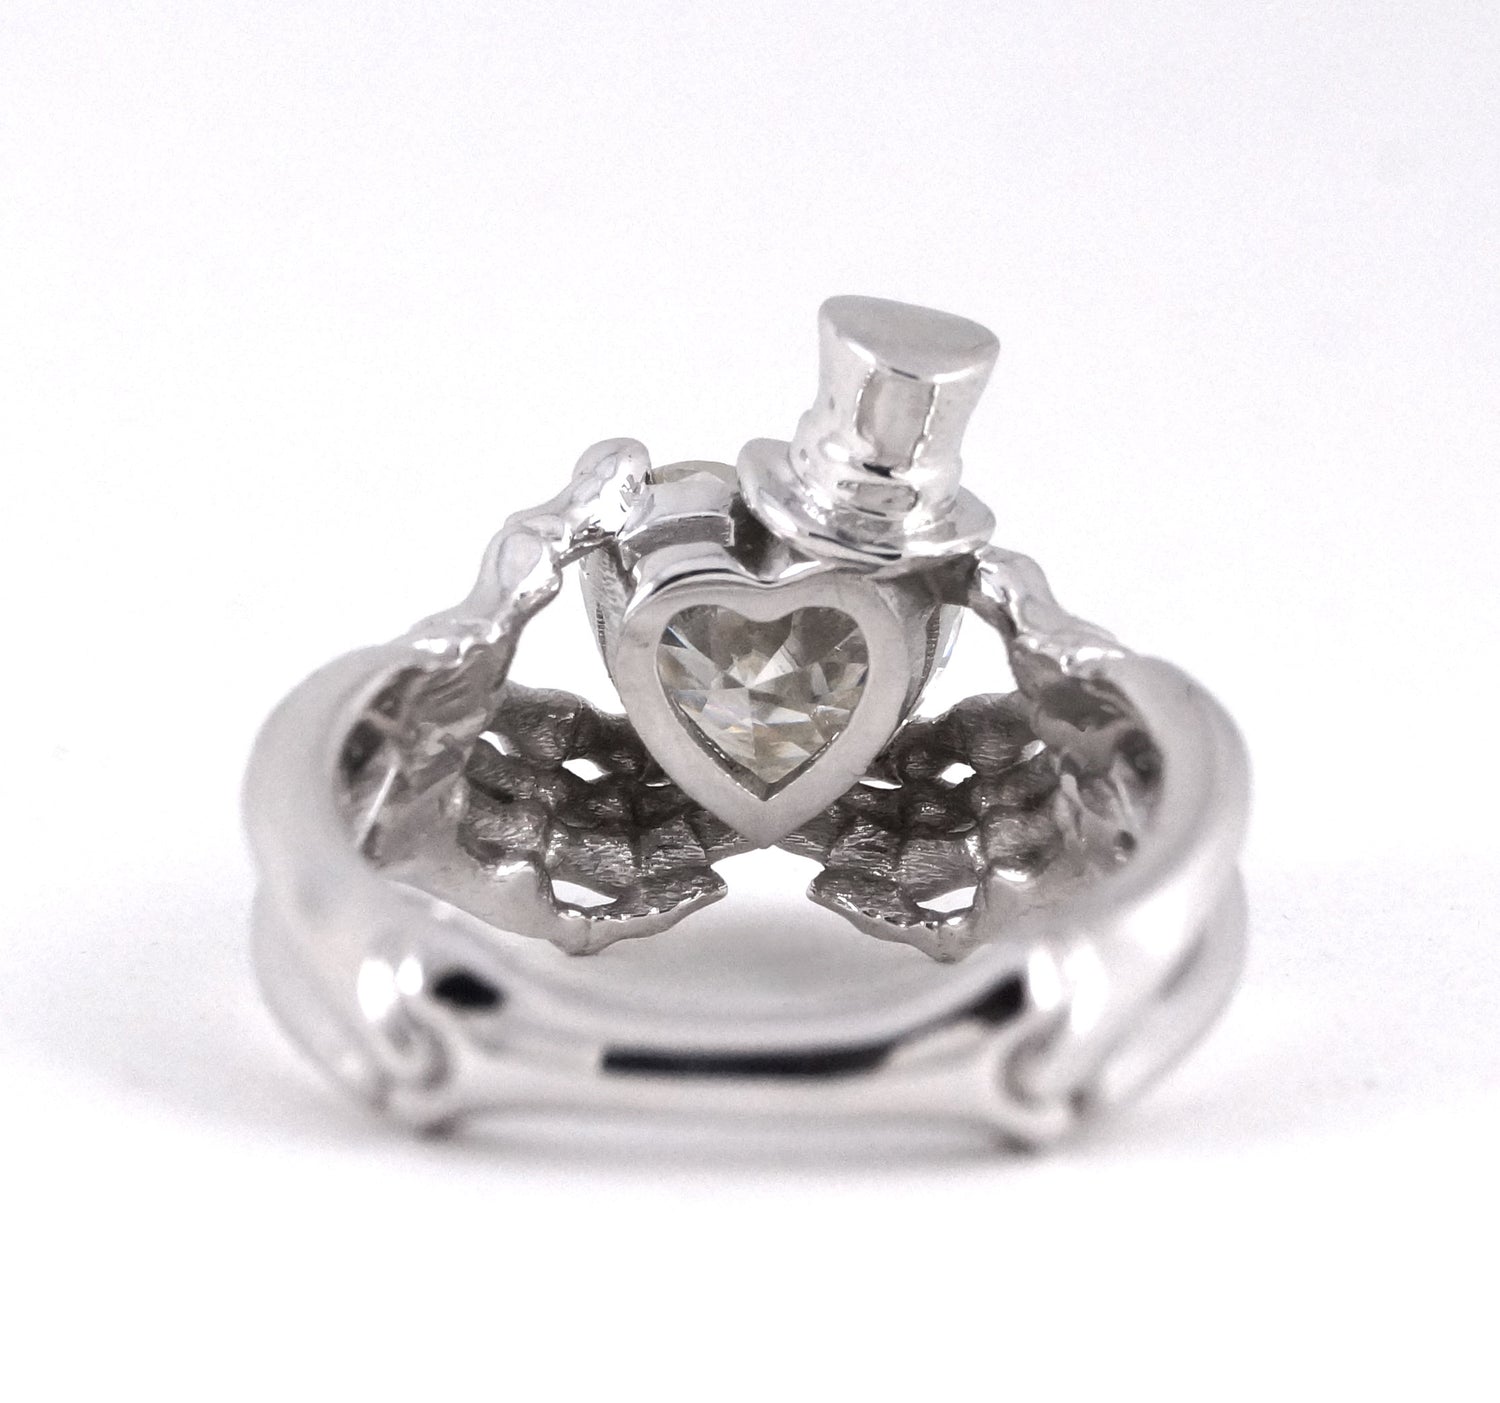 Skeleton Claddagh with Top Hat Jack Skellington Inspired Engagement Ring Heart Diamond Moissanite CZ Sterling Silver White Gold Fine Jewelry